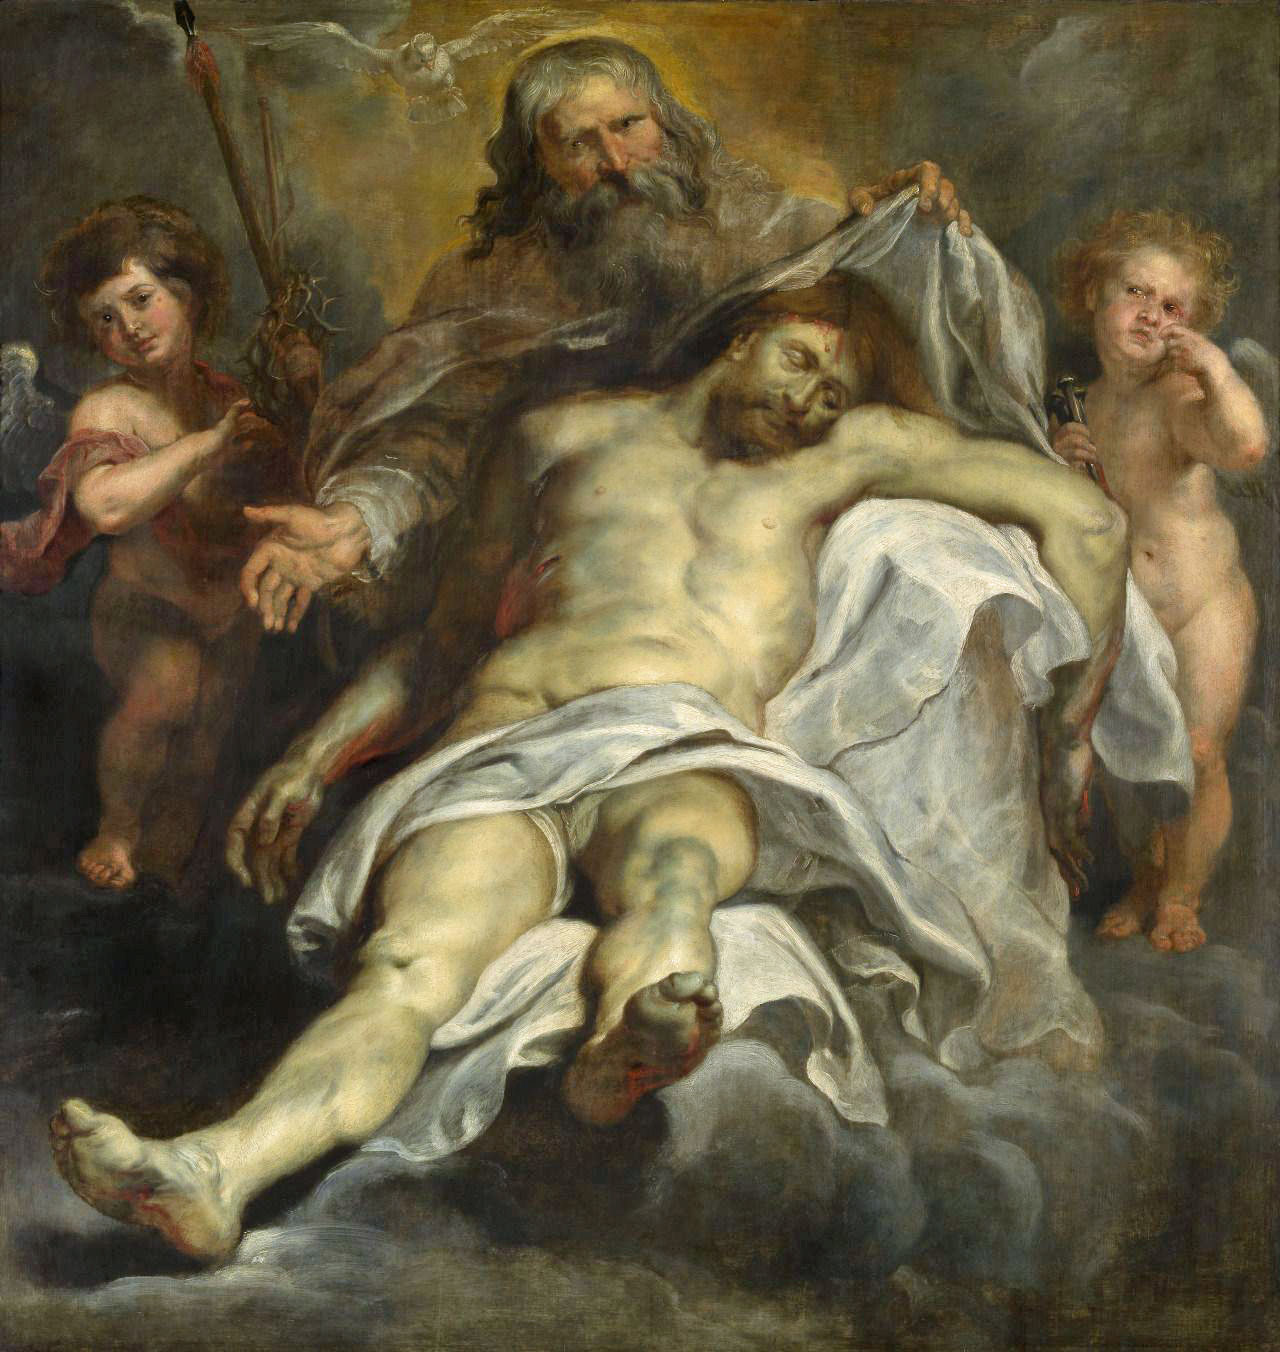 The Holy Trinity by Peter Paul Rubens (1577-1640), the most famous painter from my hometown Antwerp. Painted around 1620, it now resides in the Royal Museum of Fine Arts in Antwerp, which reopened after extensive restorations in 2022. Definitely worth a visit!